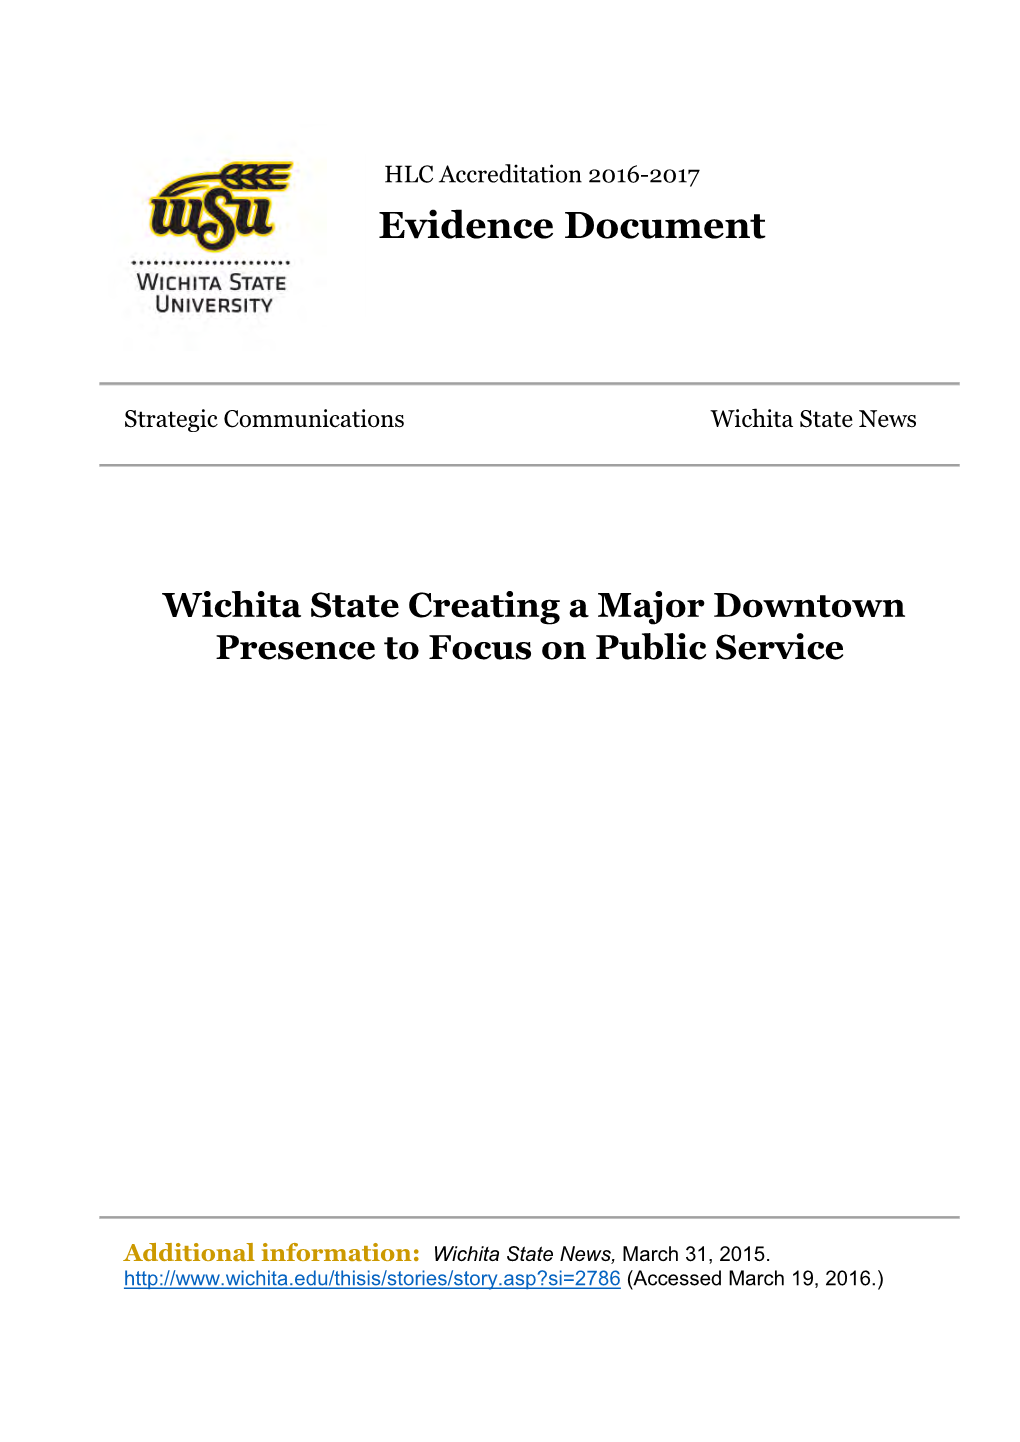 Wichita State Creating a Major Downtown Presence to Focus on Public Service